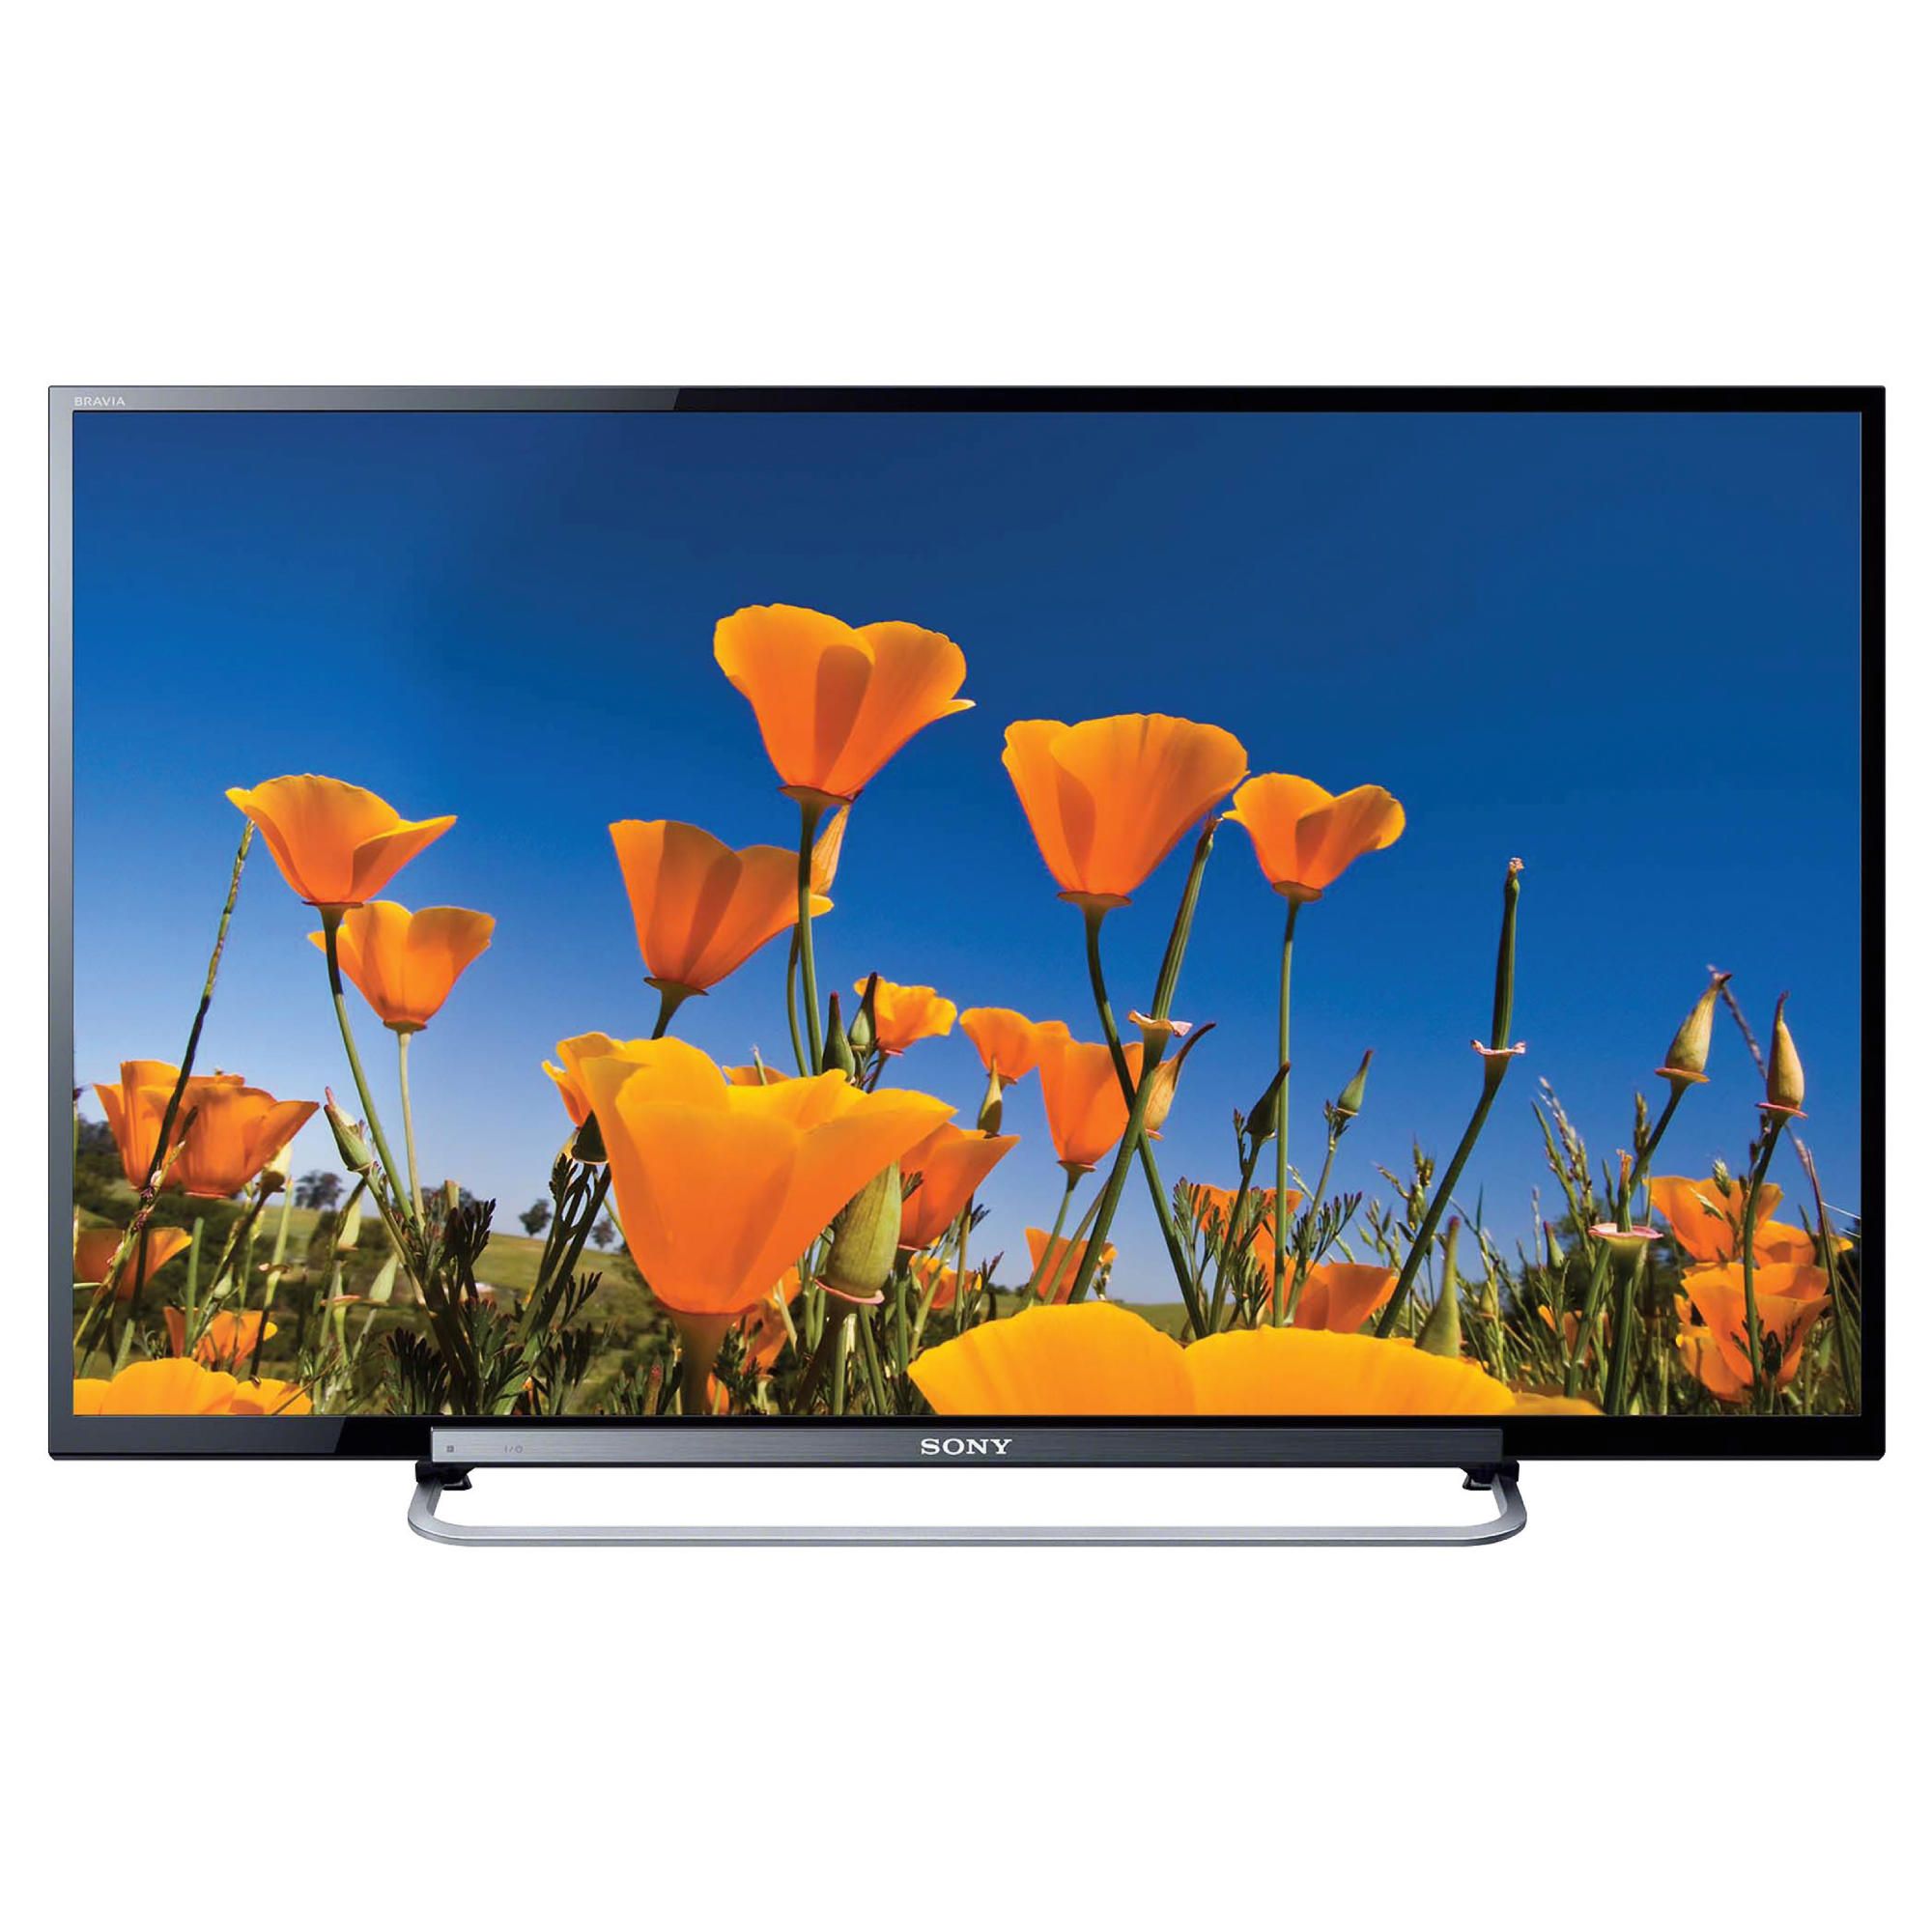 Sony KDL32W653ABU 32 Inch Full HD 1080P LED Smart TV with Freeview HD